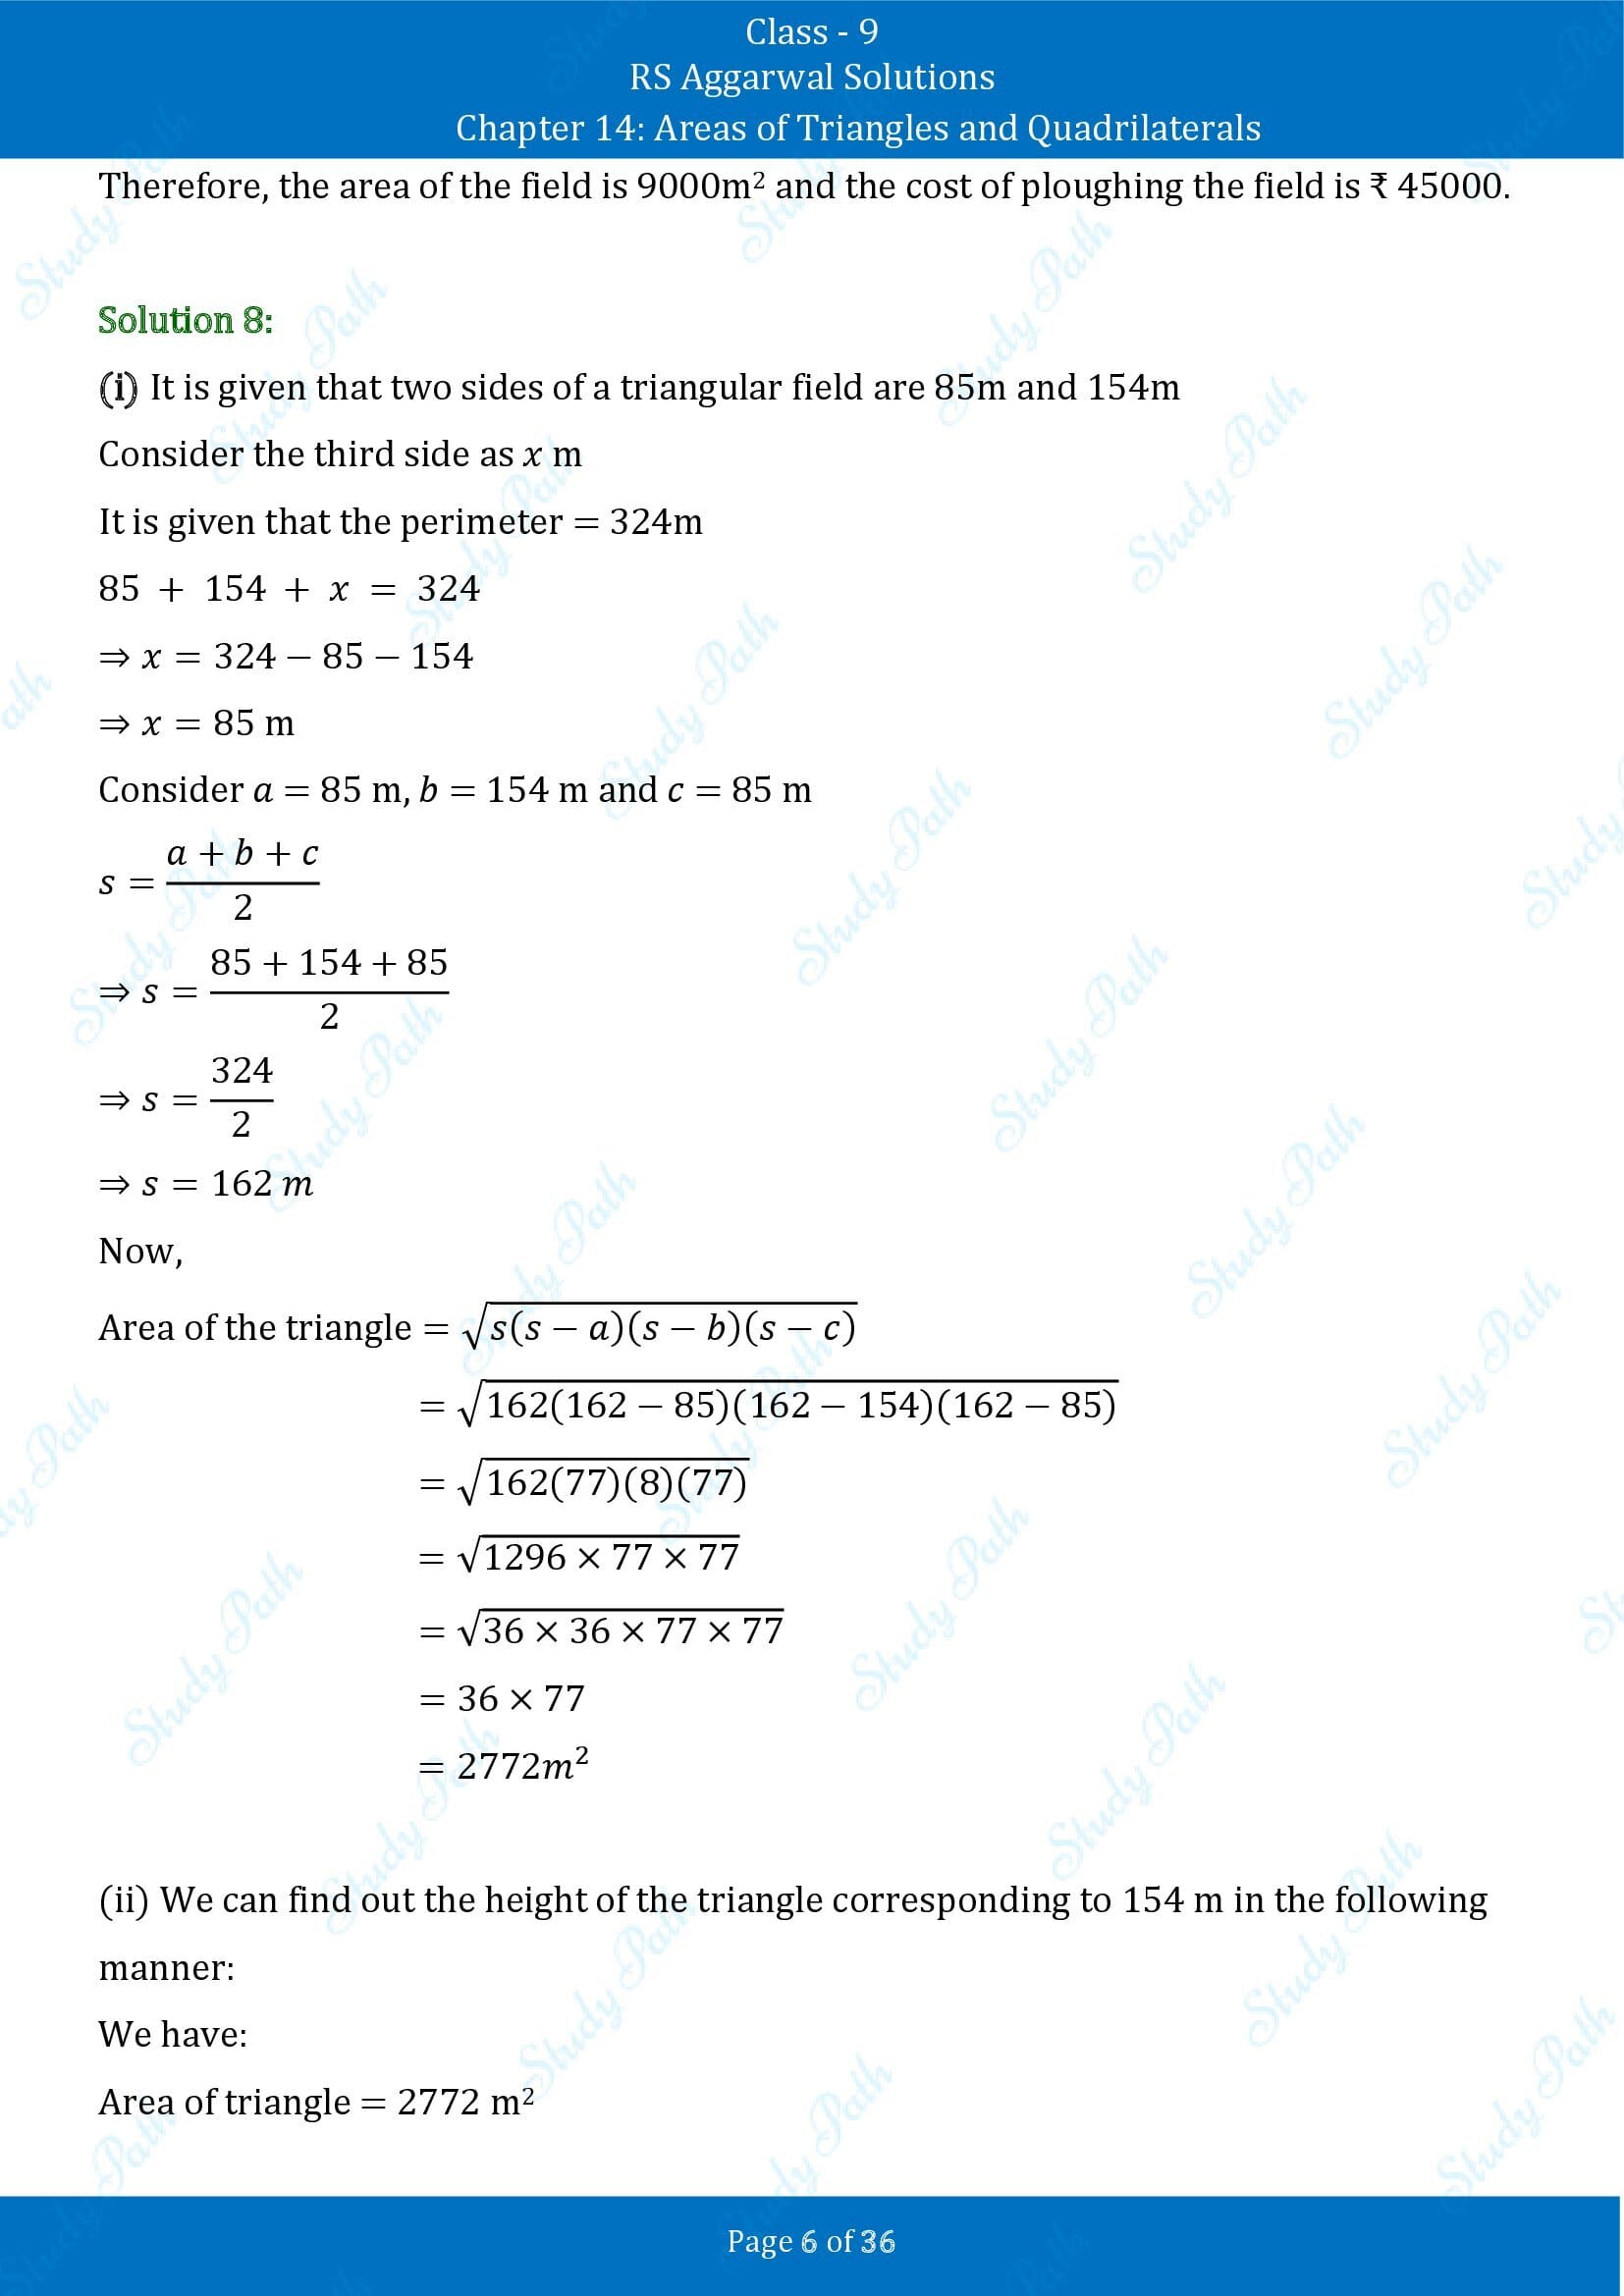 RS Aggarwal Solutions Class 9 Chapter 14 Areas of Triangles and Quadrilaterals Exercise 14 00006